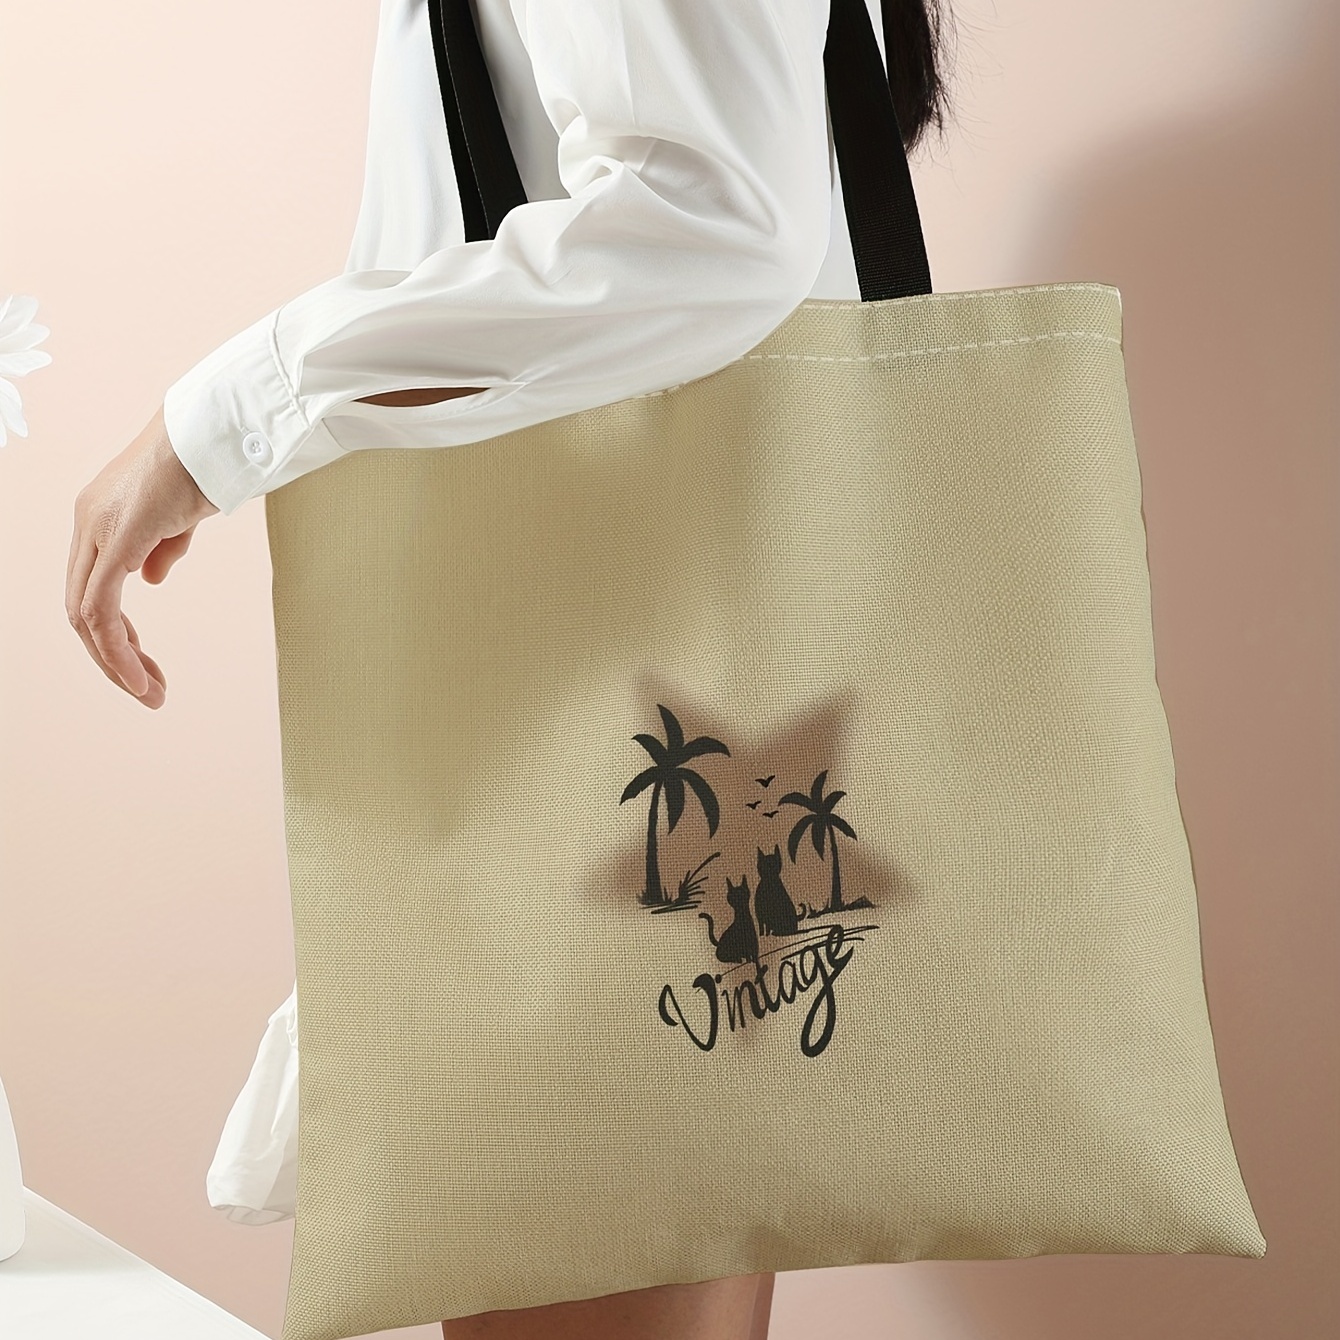 You're Like Really Pretty Cotton Canvas Tote Bag – The Cotton & Canvas Co.